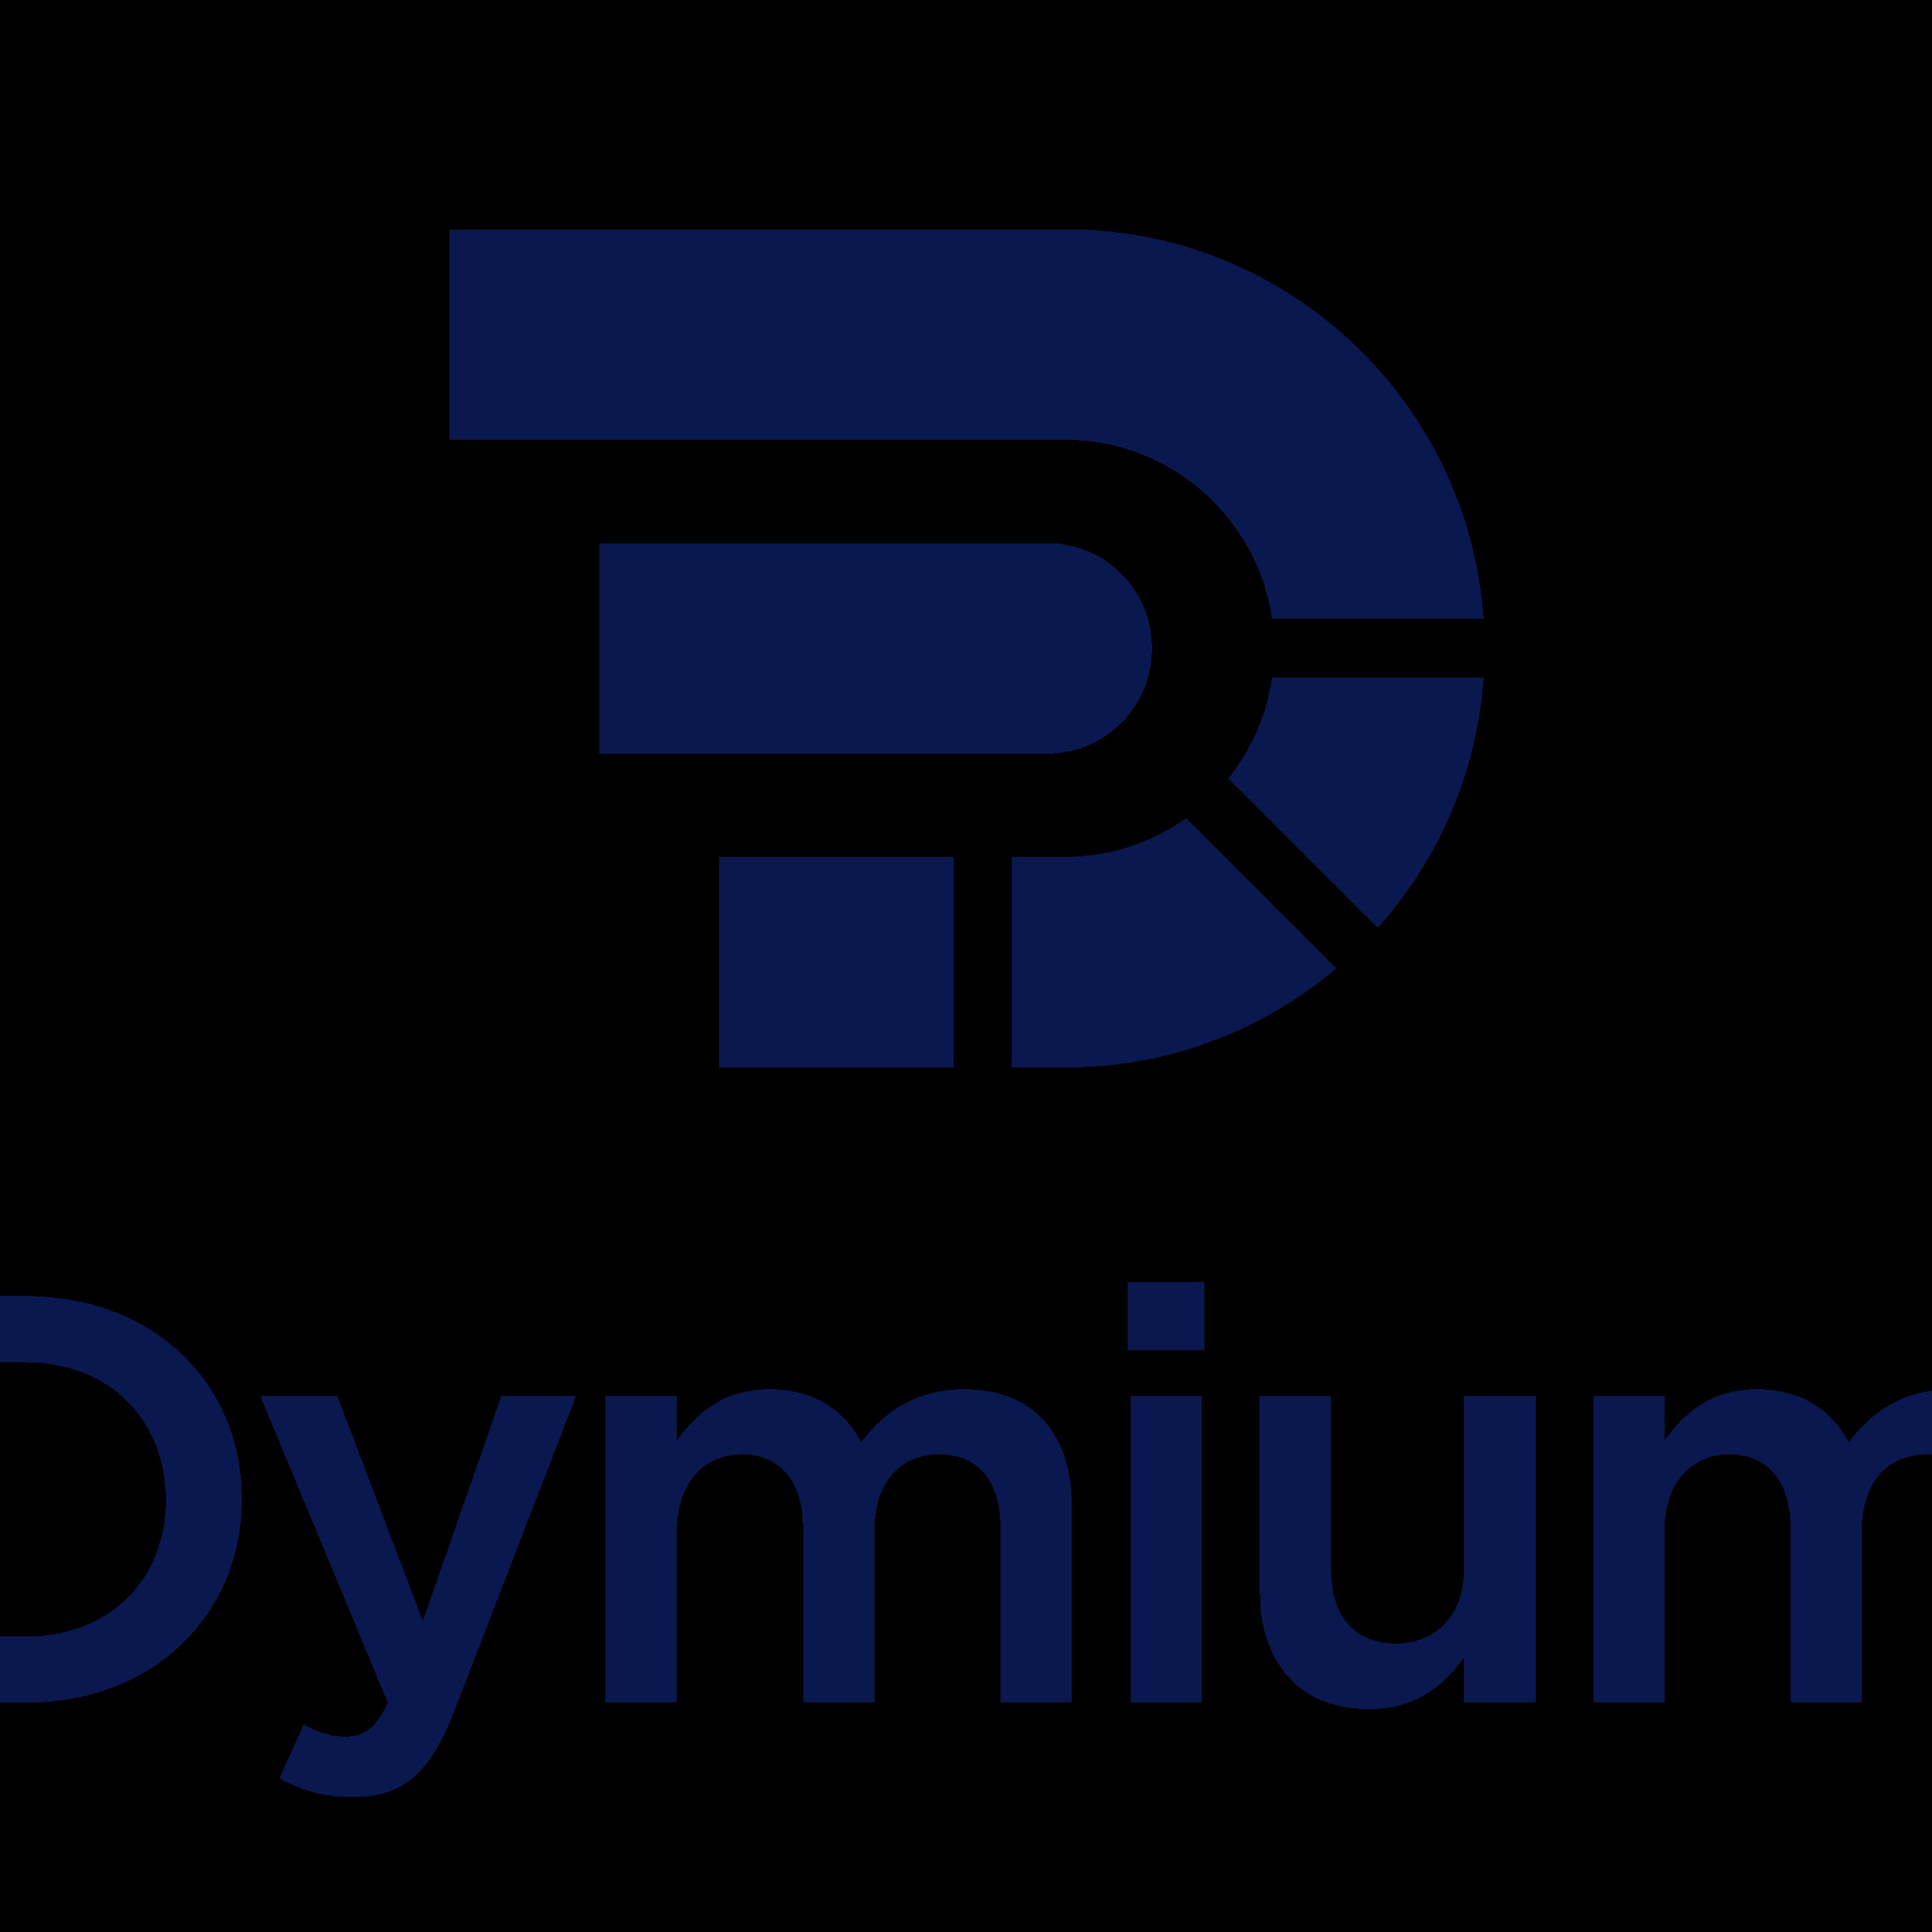 Dark blue letter "D" with the word Dymium underneath